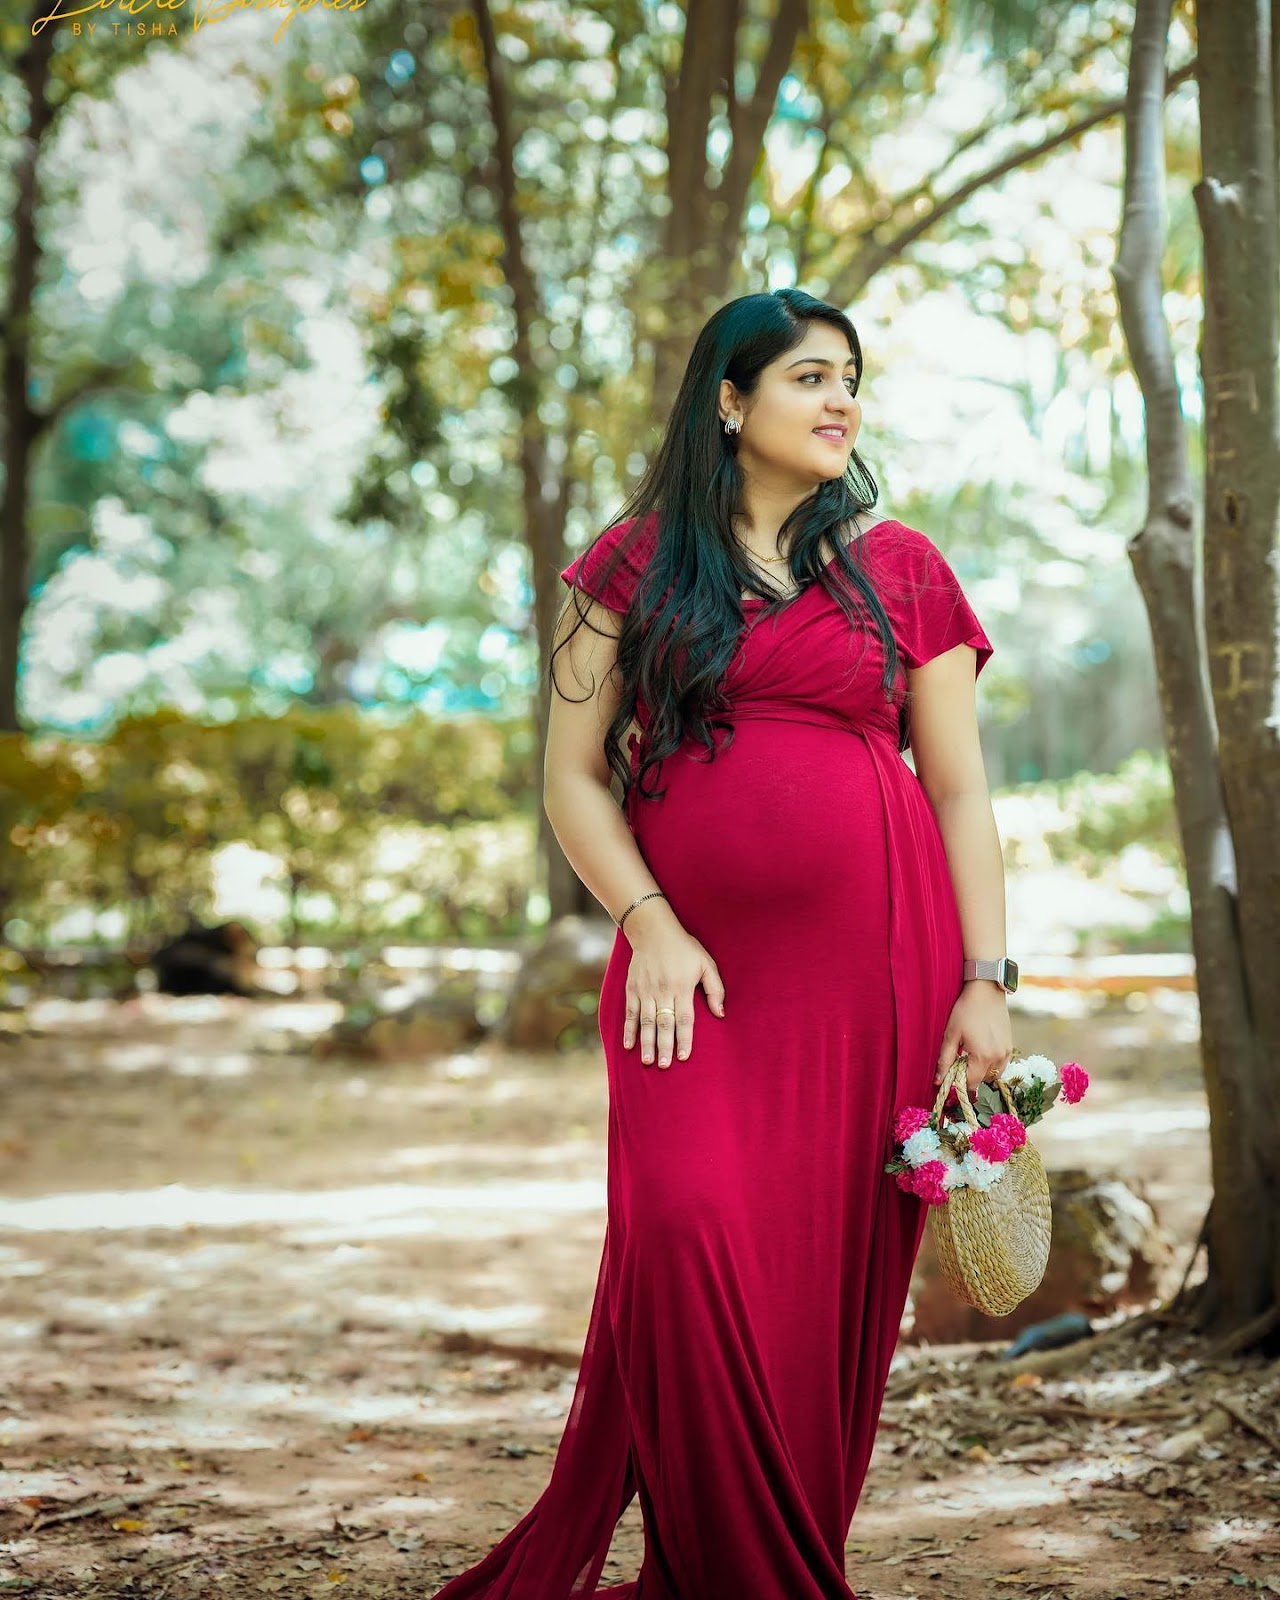 Little Dimples By Tisha is a well-known Maternity Photoshoot in Bangalore. Specialized in Maternity Photoshoot, pregnancy, and Baby Photoshoot Bangalore.